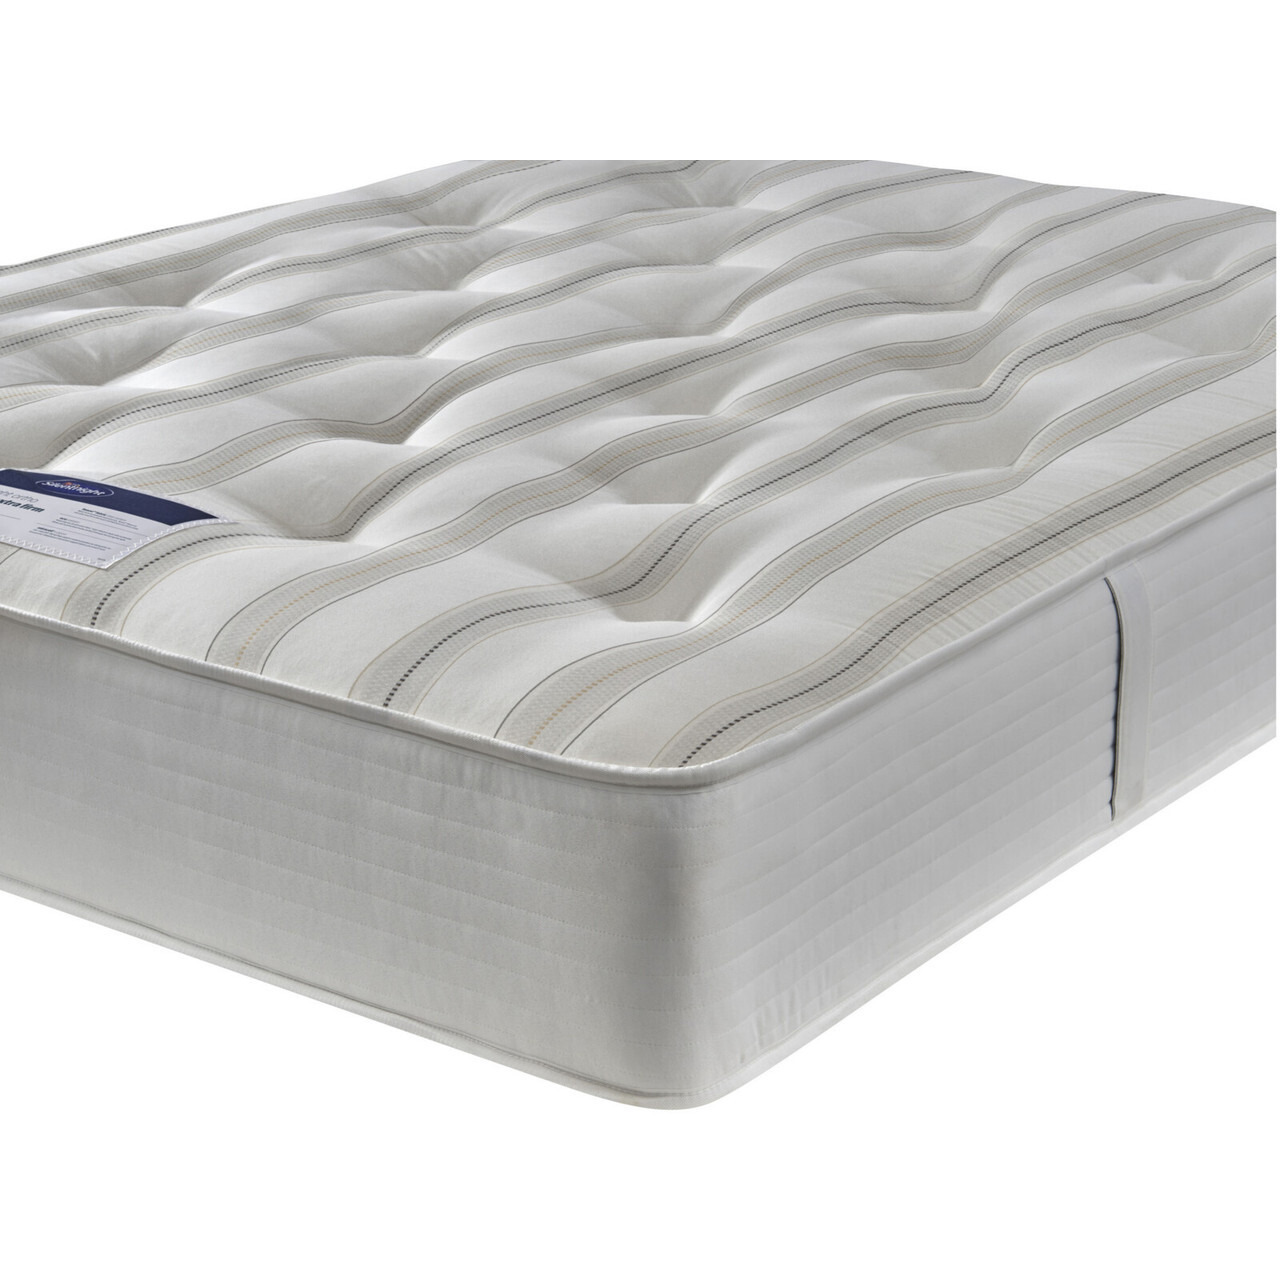 Silentnight Ortho Support Extra Firm Mattress - image 1